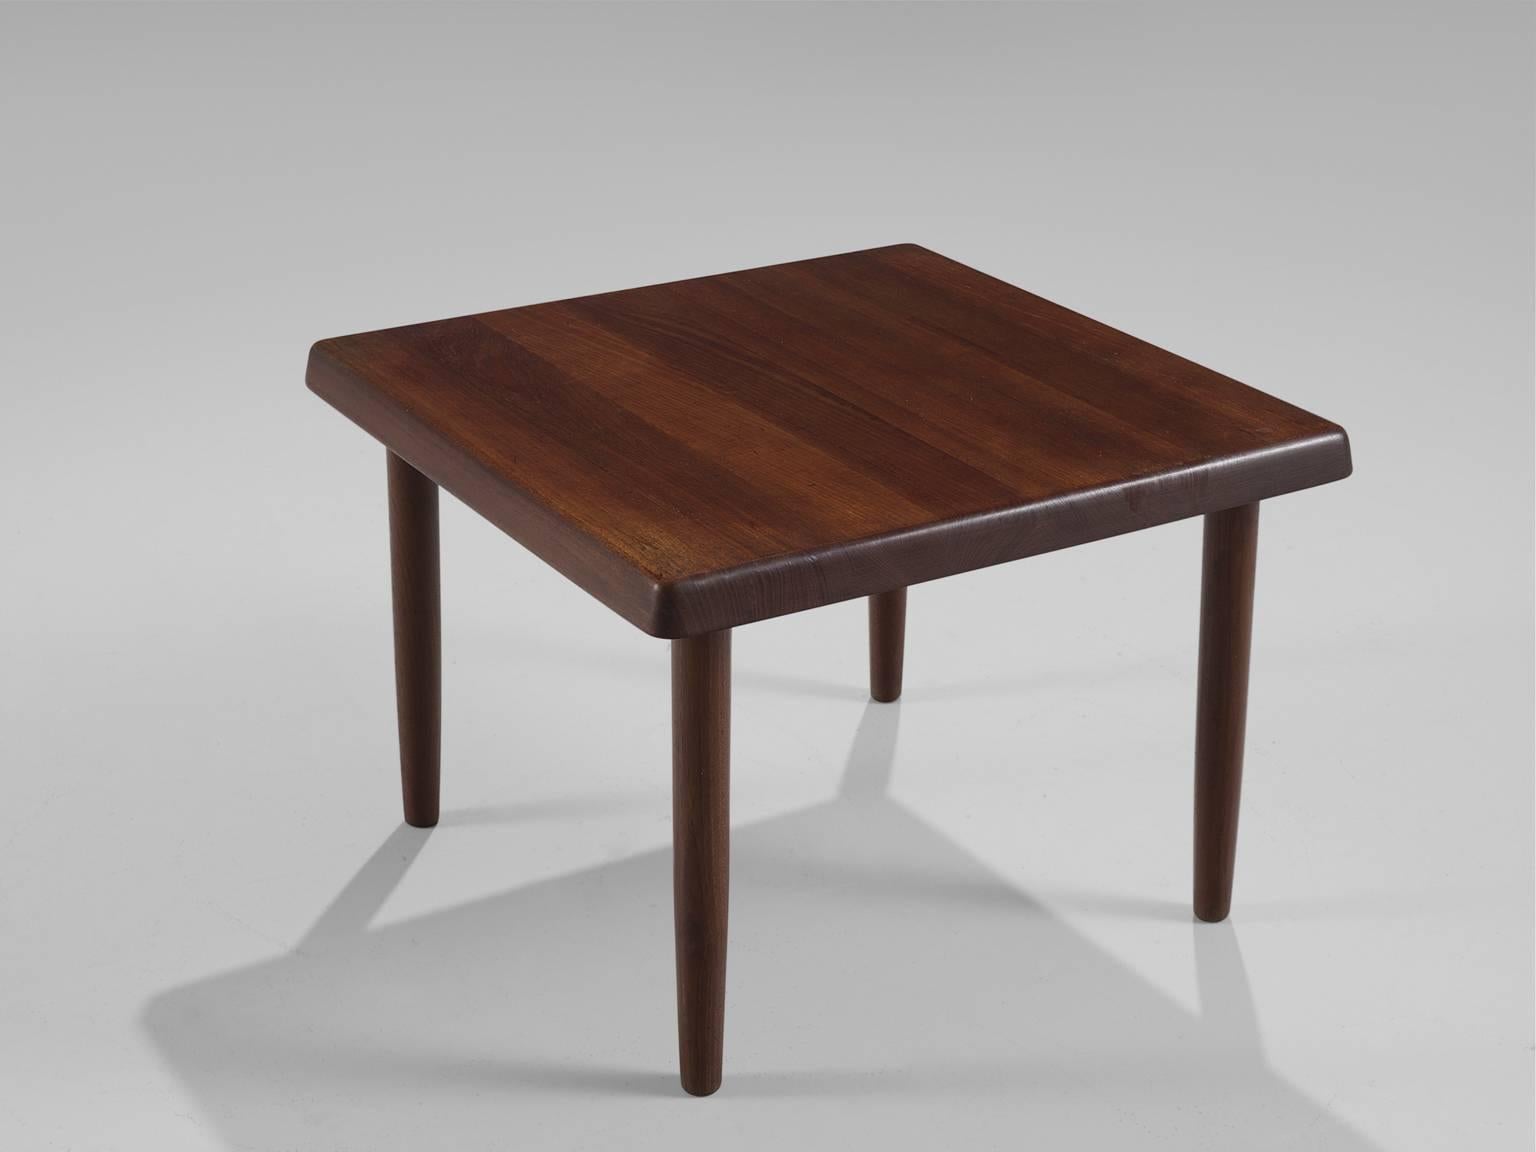 Coffee table, solid teak, Denmark, 1950s

This square coffee or side table table is an example the elegant midcentury Danish design. The top features soft edges and warm, orange to red colored teak with a very nice contrasting grain. The four